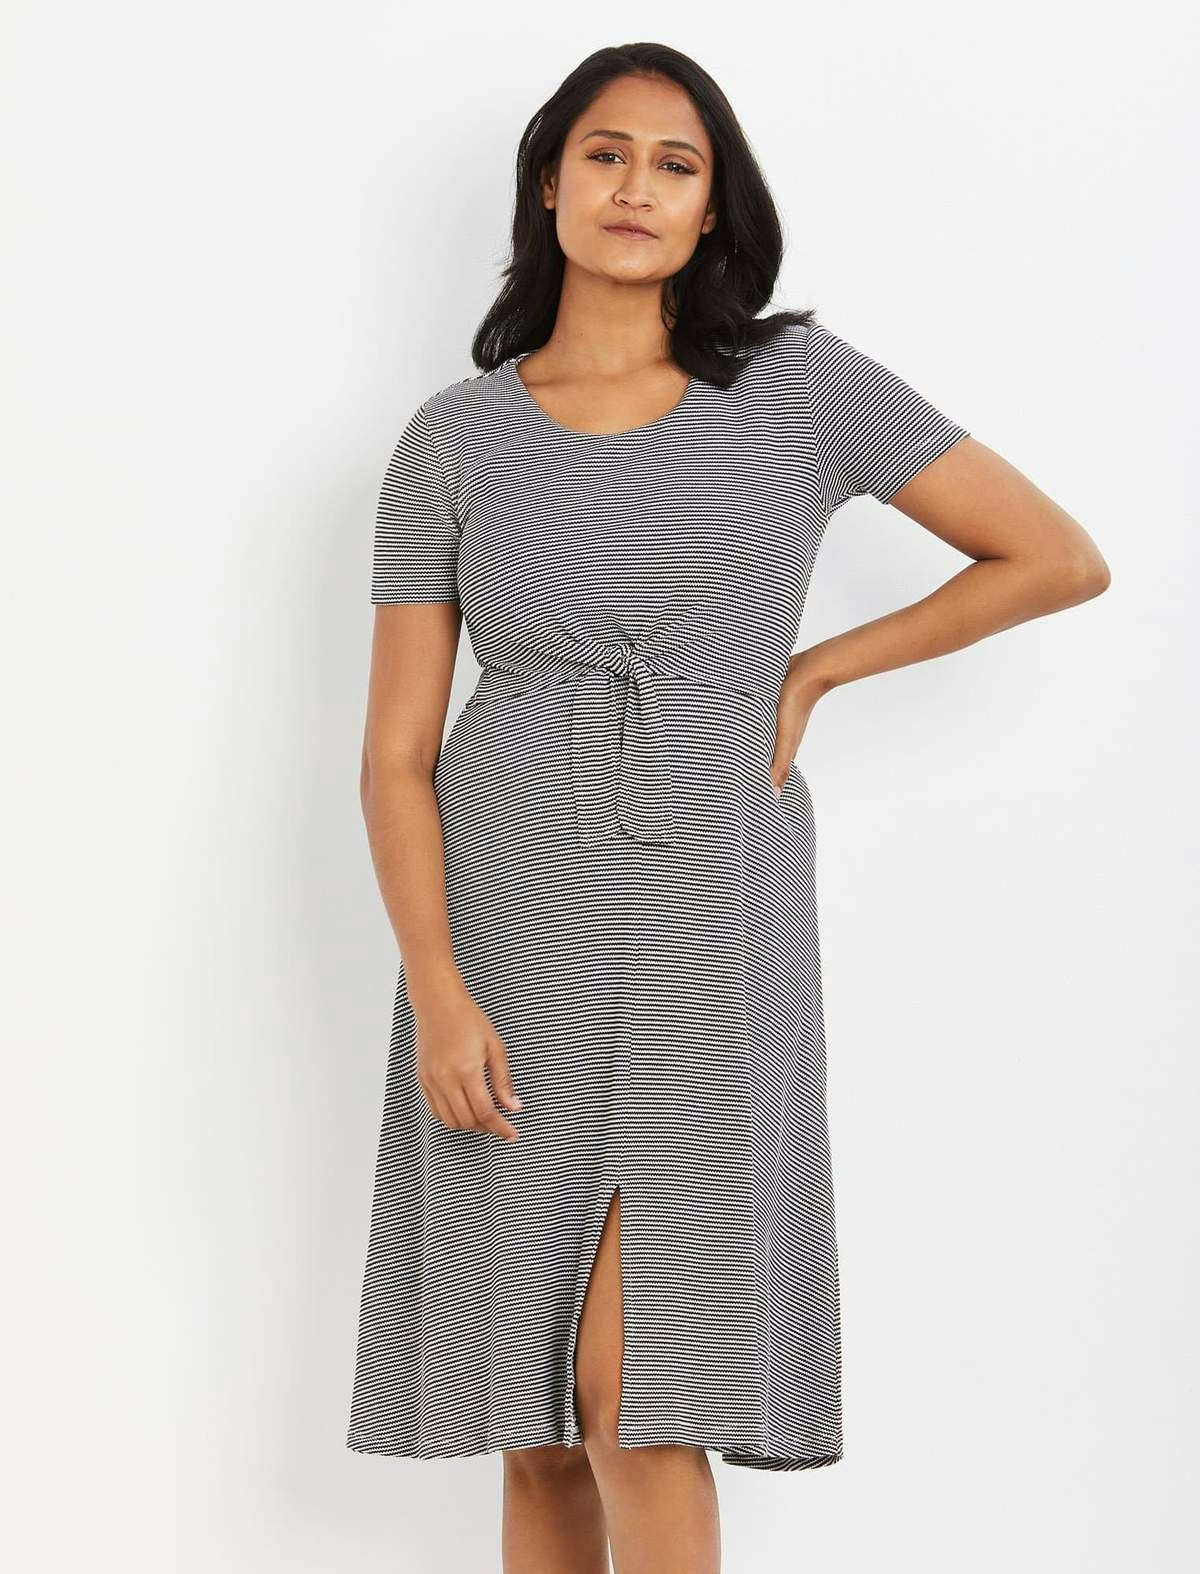 18 Best Nursing Dresses That Are Both Practical and Stylish AF